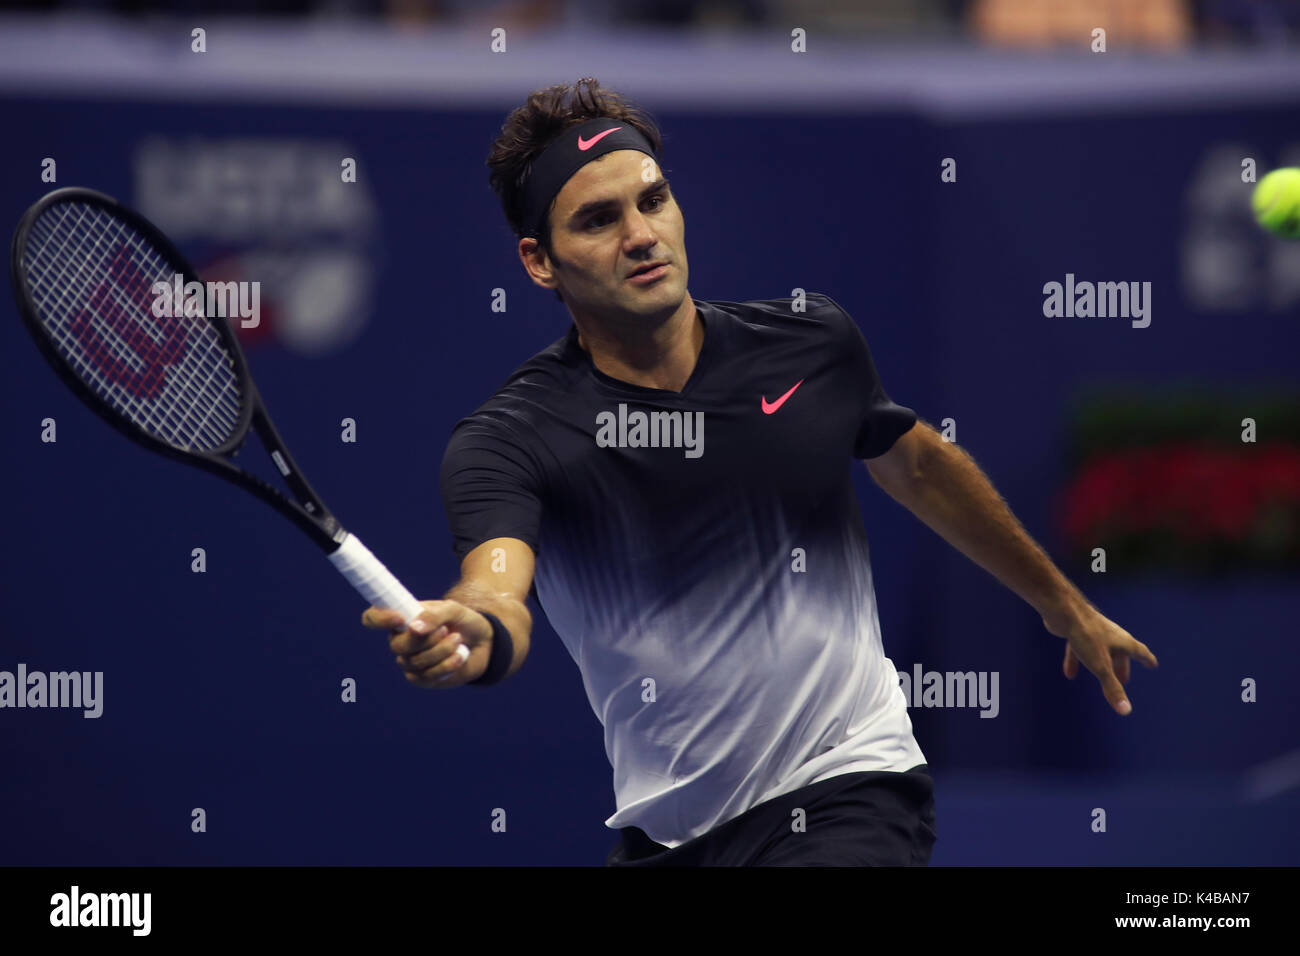 New York, United States. 04th Sep, 2017. US Open Tennis: New York, 4  September, 2017 - Roger Federer during his fourth round match against  Phillip Kolschrieber at the US Open in Flushing